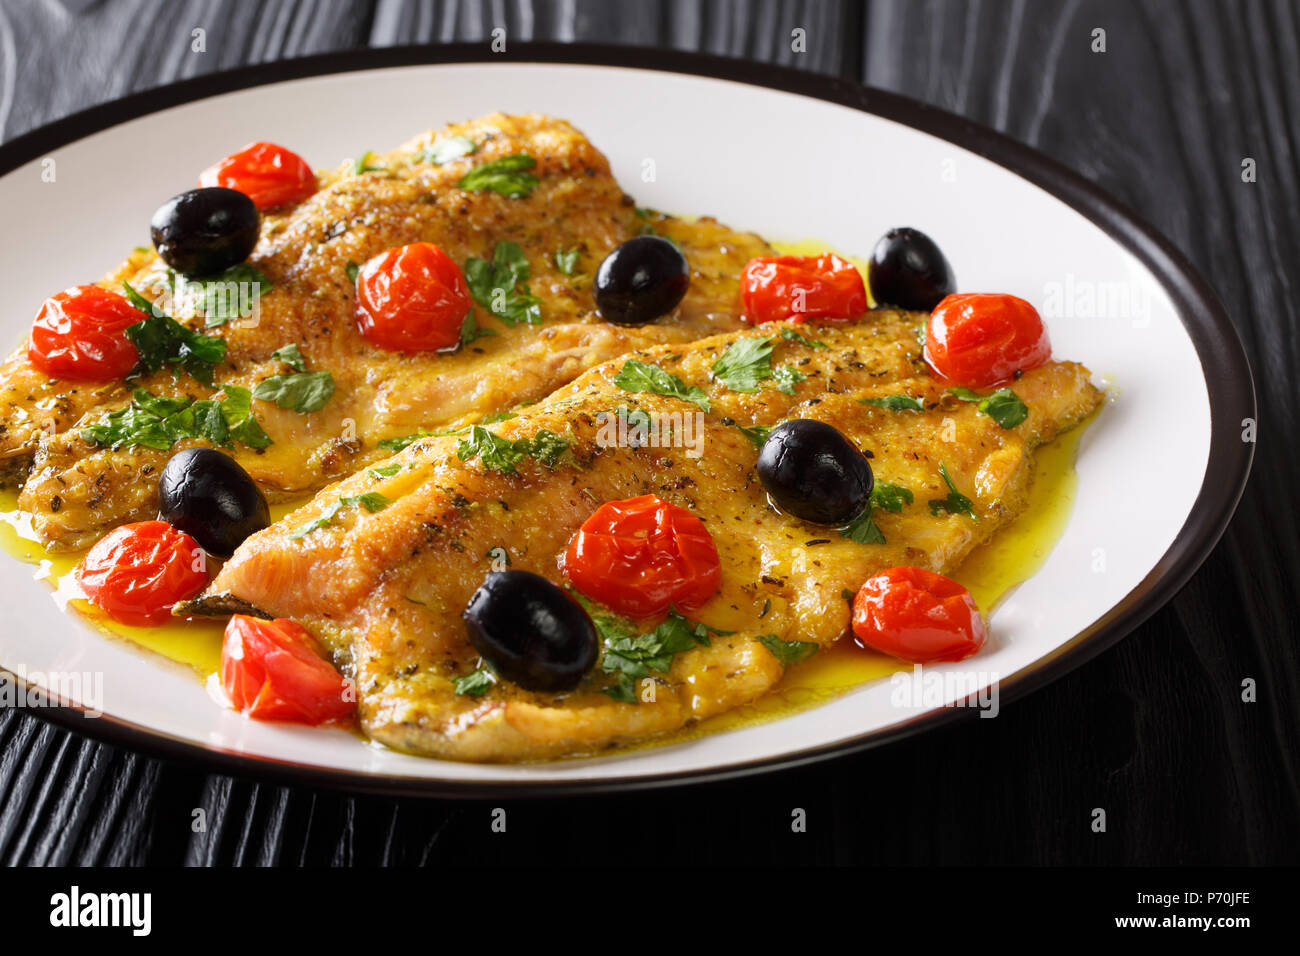 Mediterranean cuisine: fried trout fillets with garlic lemon butter sauce, tomatoes, parsley and olives close-up on a plate on a table. horizontal Stock Photo